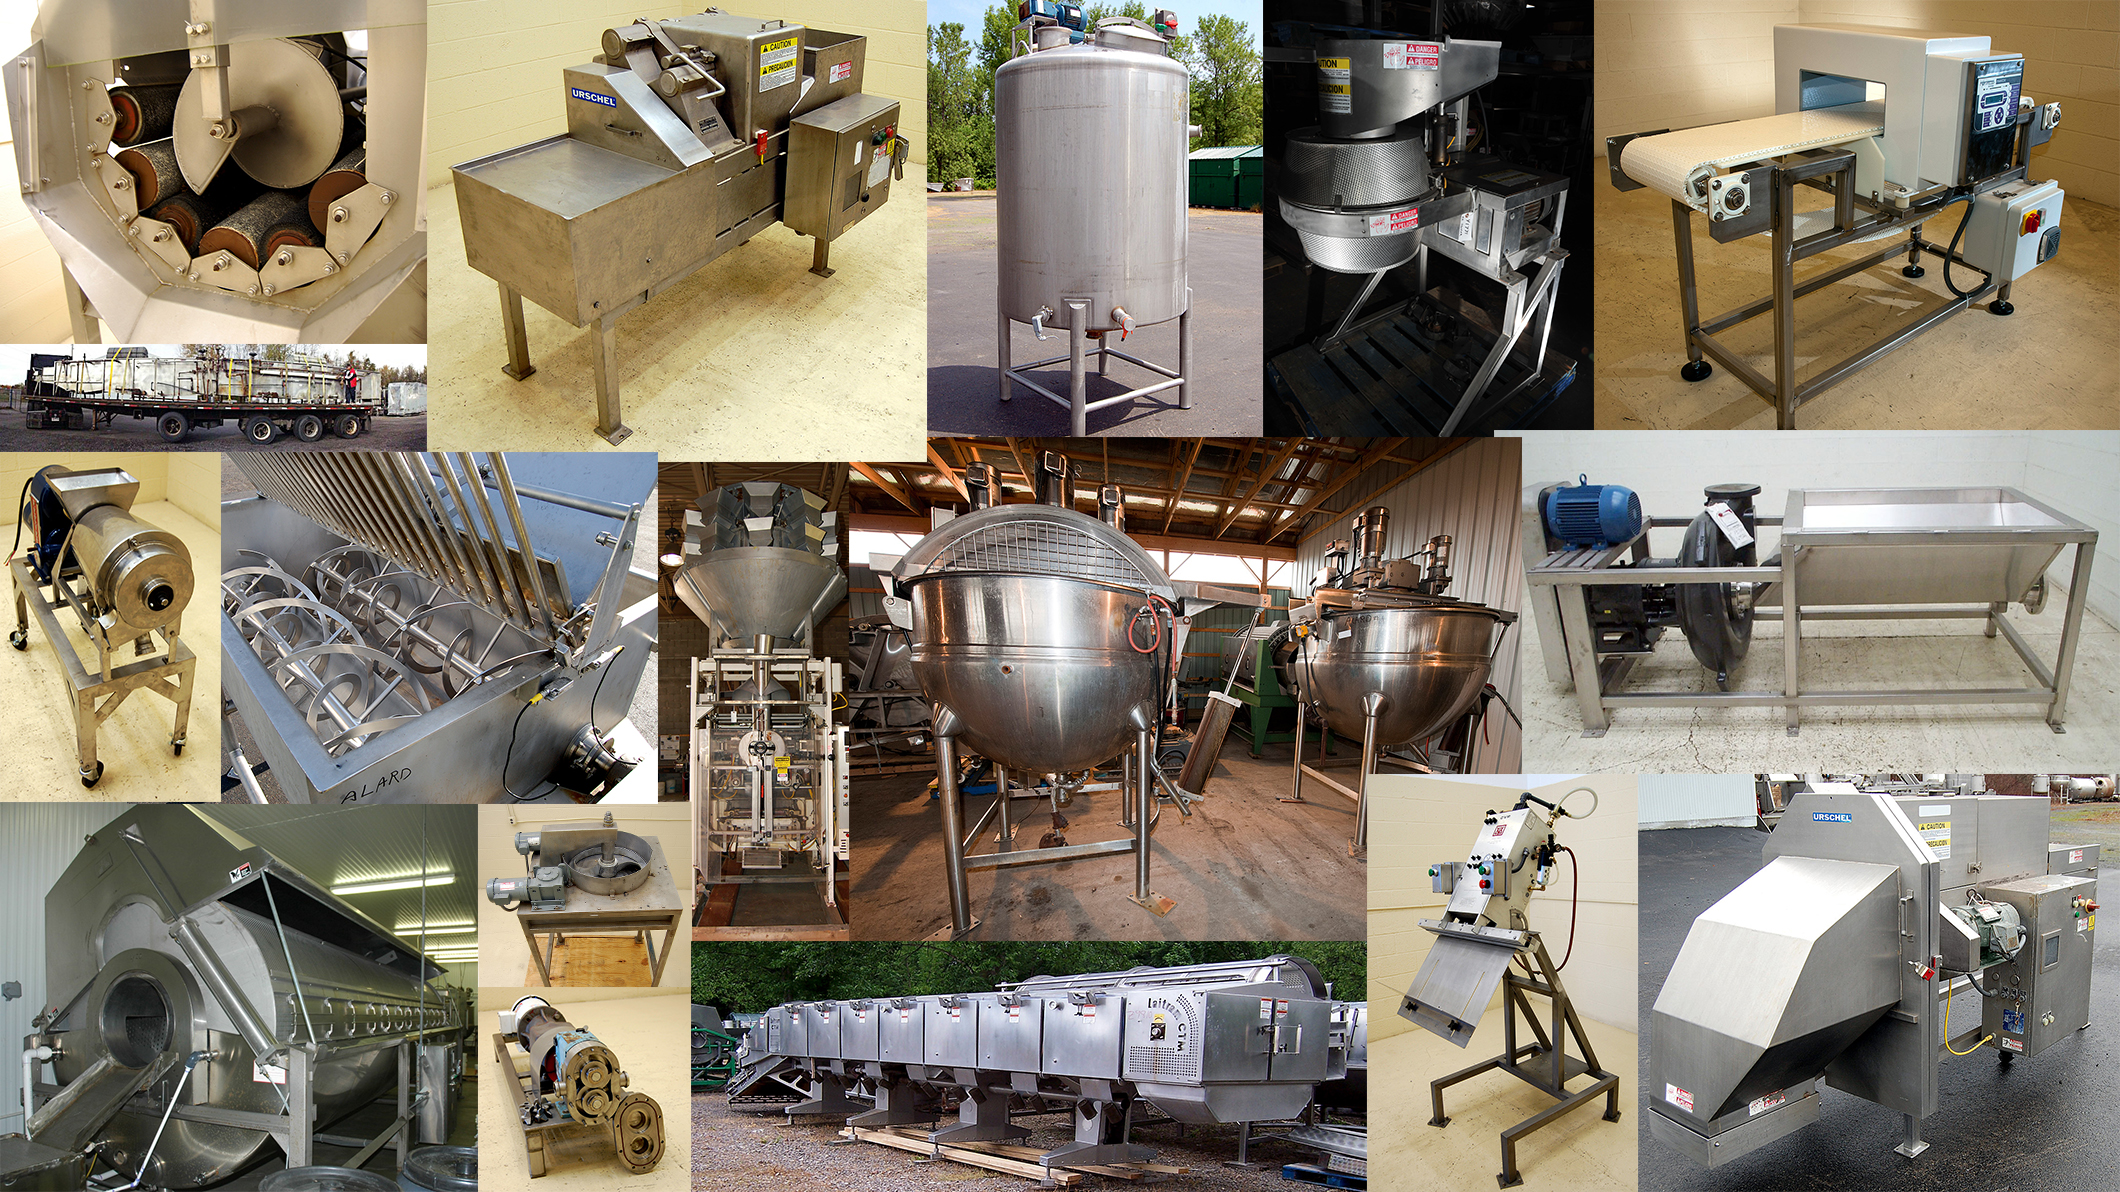 home food processing equipment